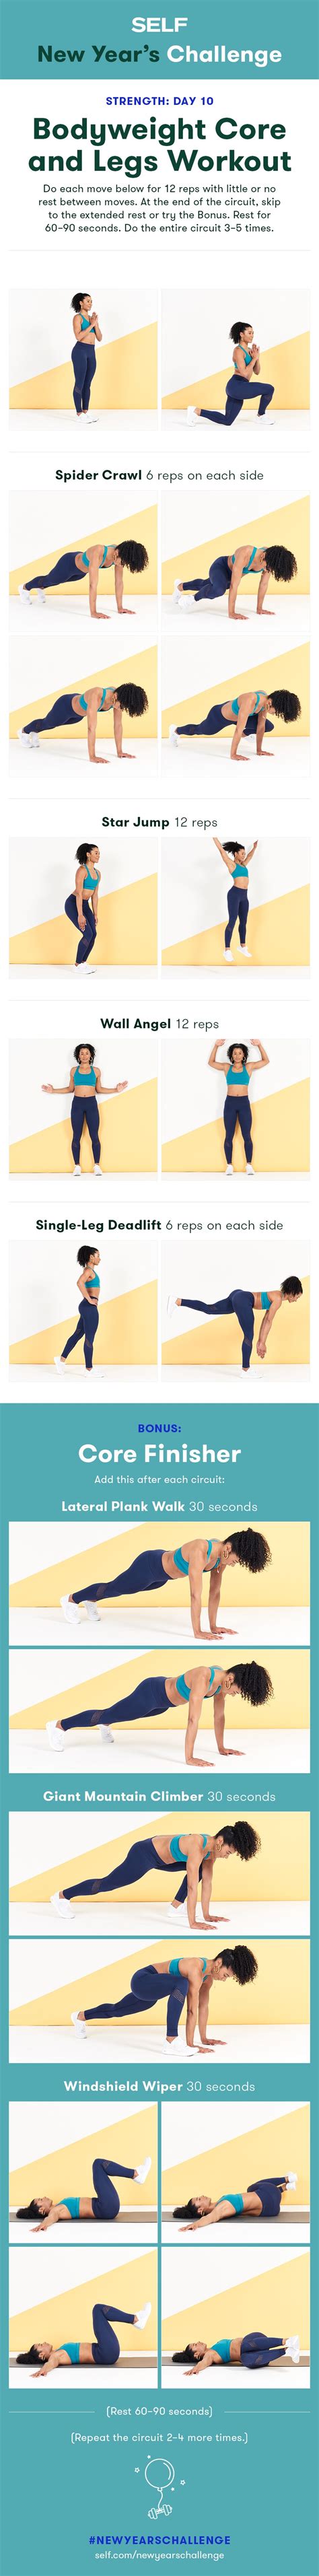 a bodyweight workout for core and legs self